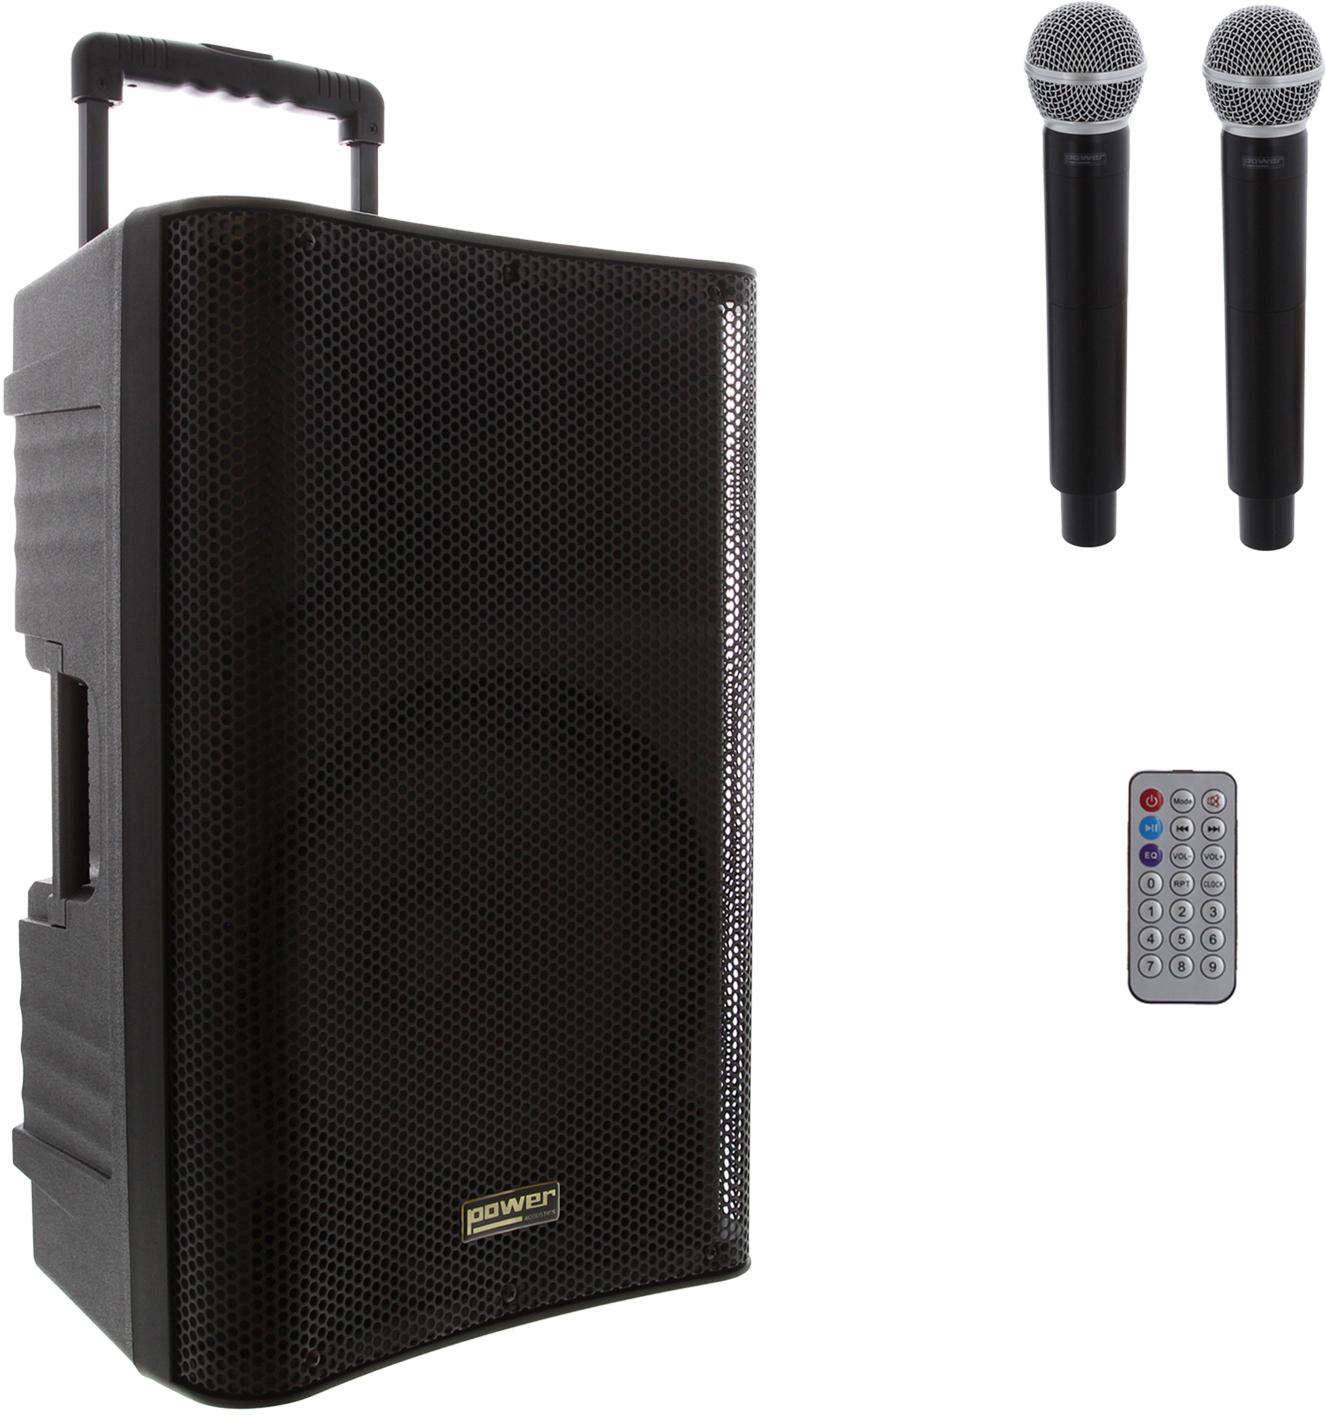 Power Acoustics Taky 12 Media - Portable PA system - Main picture